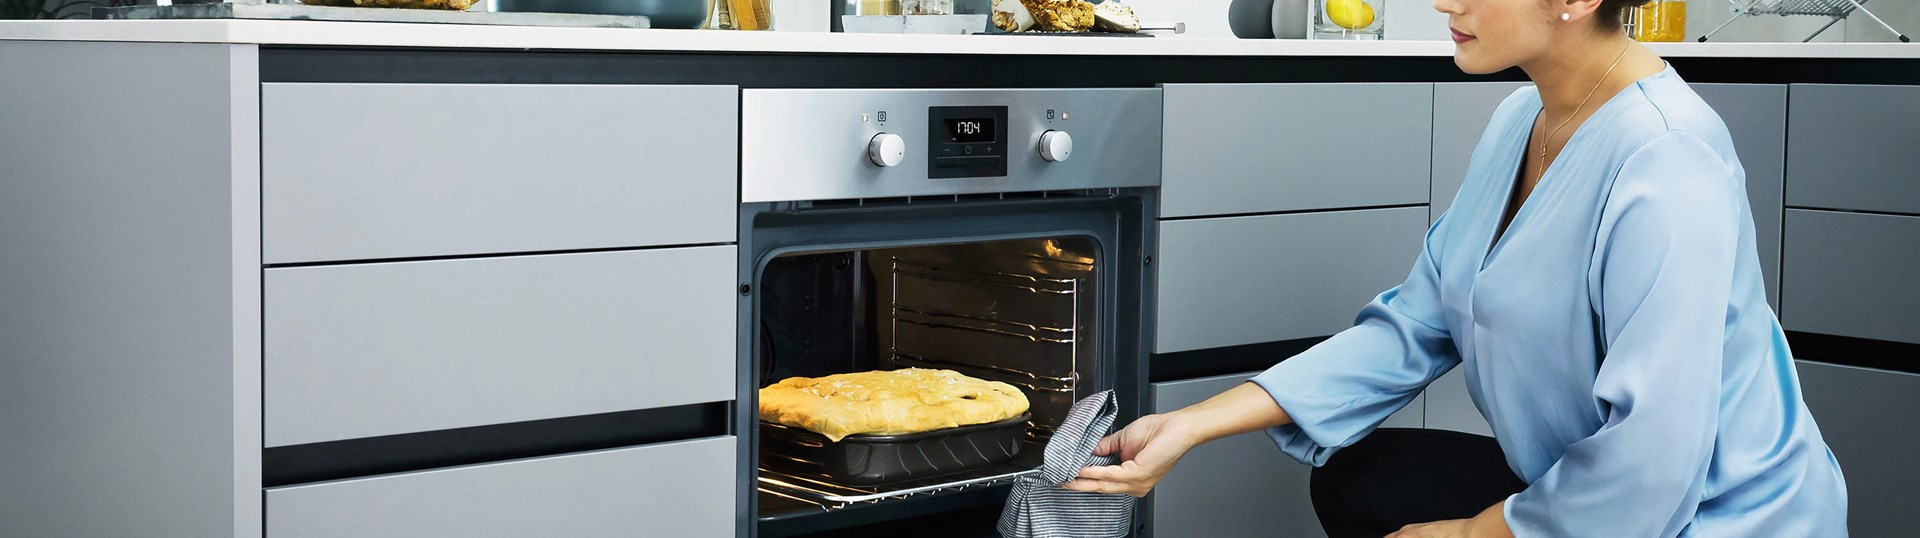 category_oven_3000x840.jpg